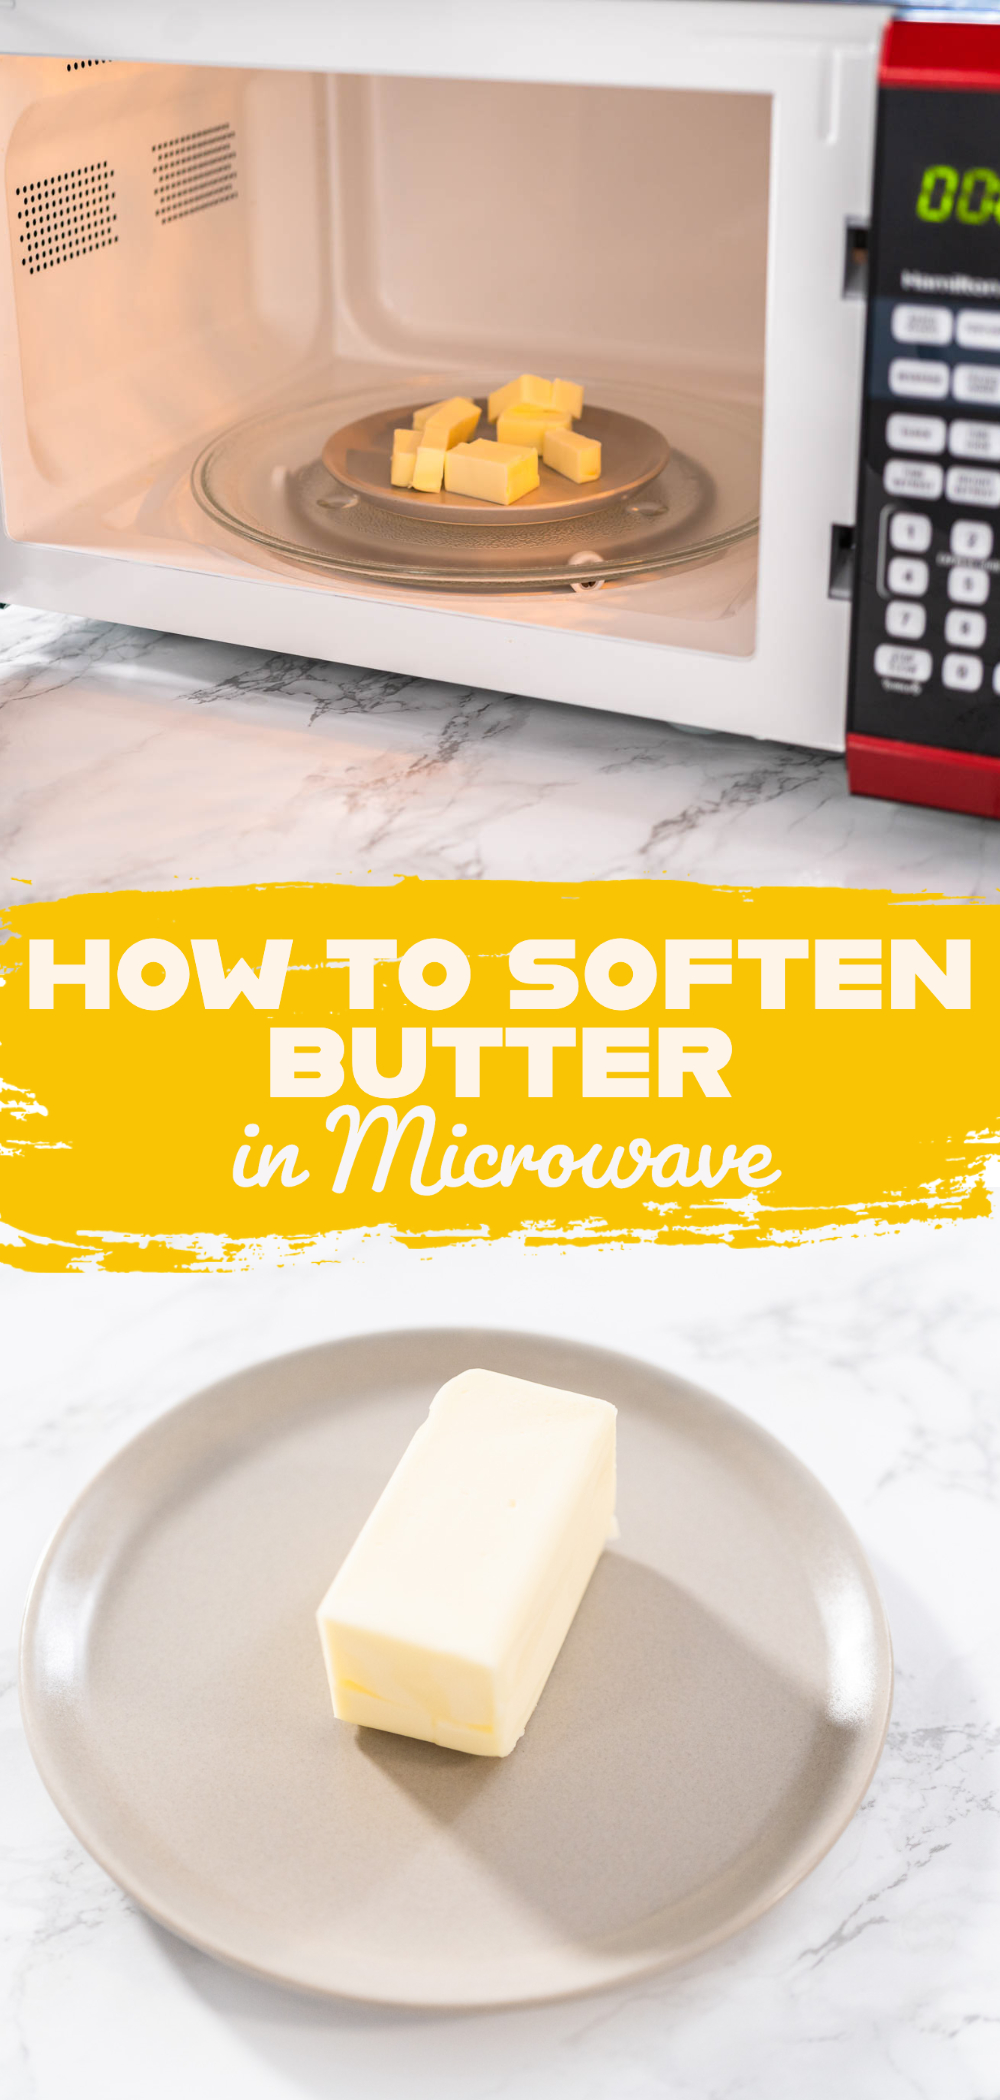 How to Soften Butter in Microwave